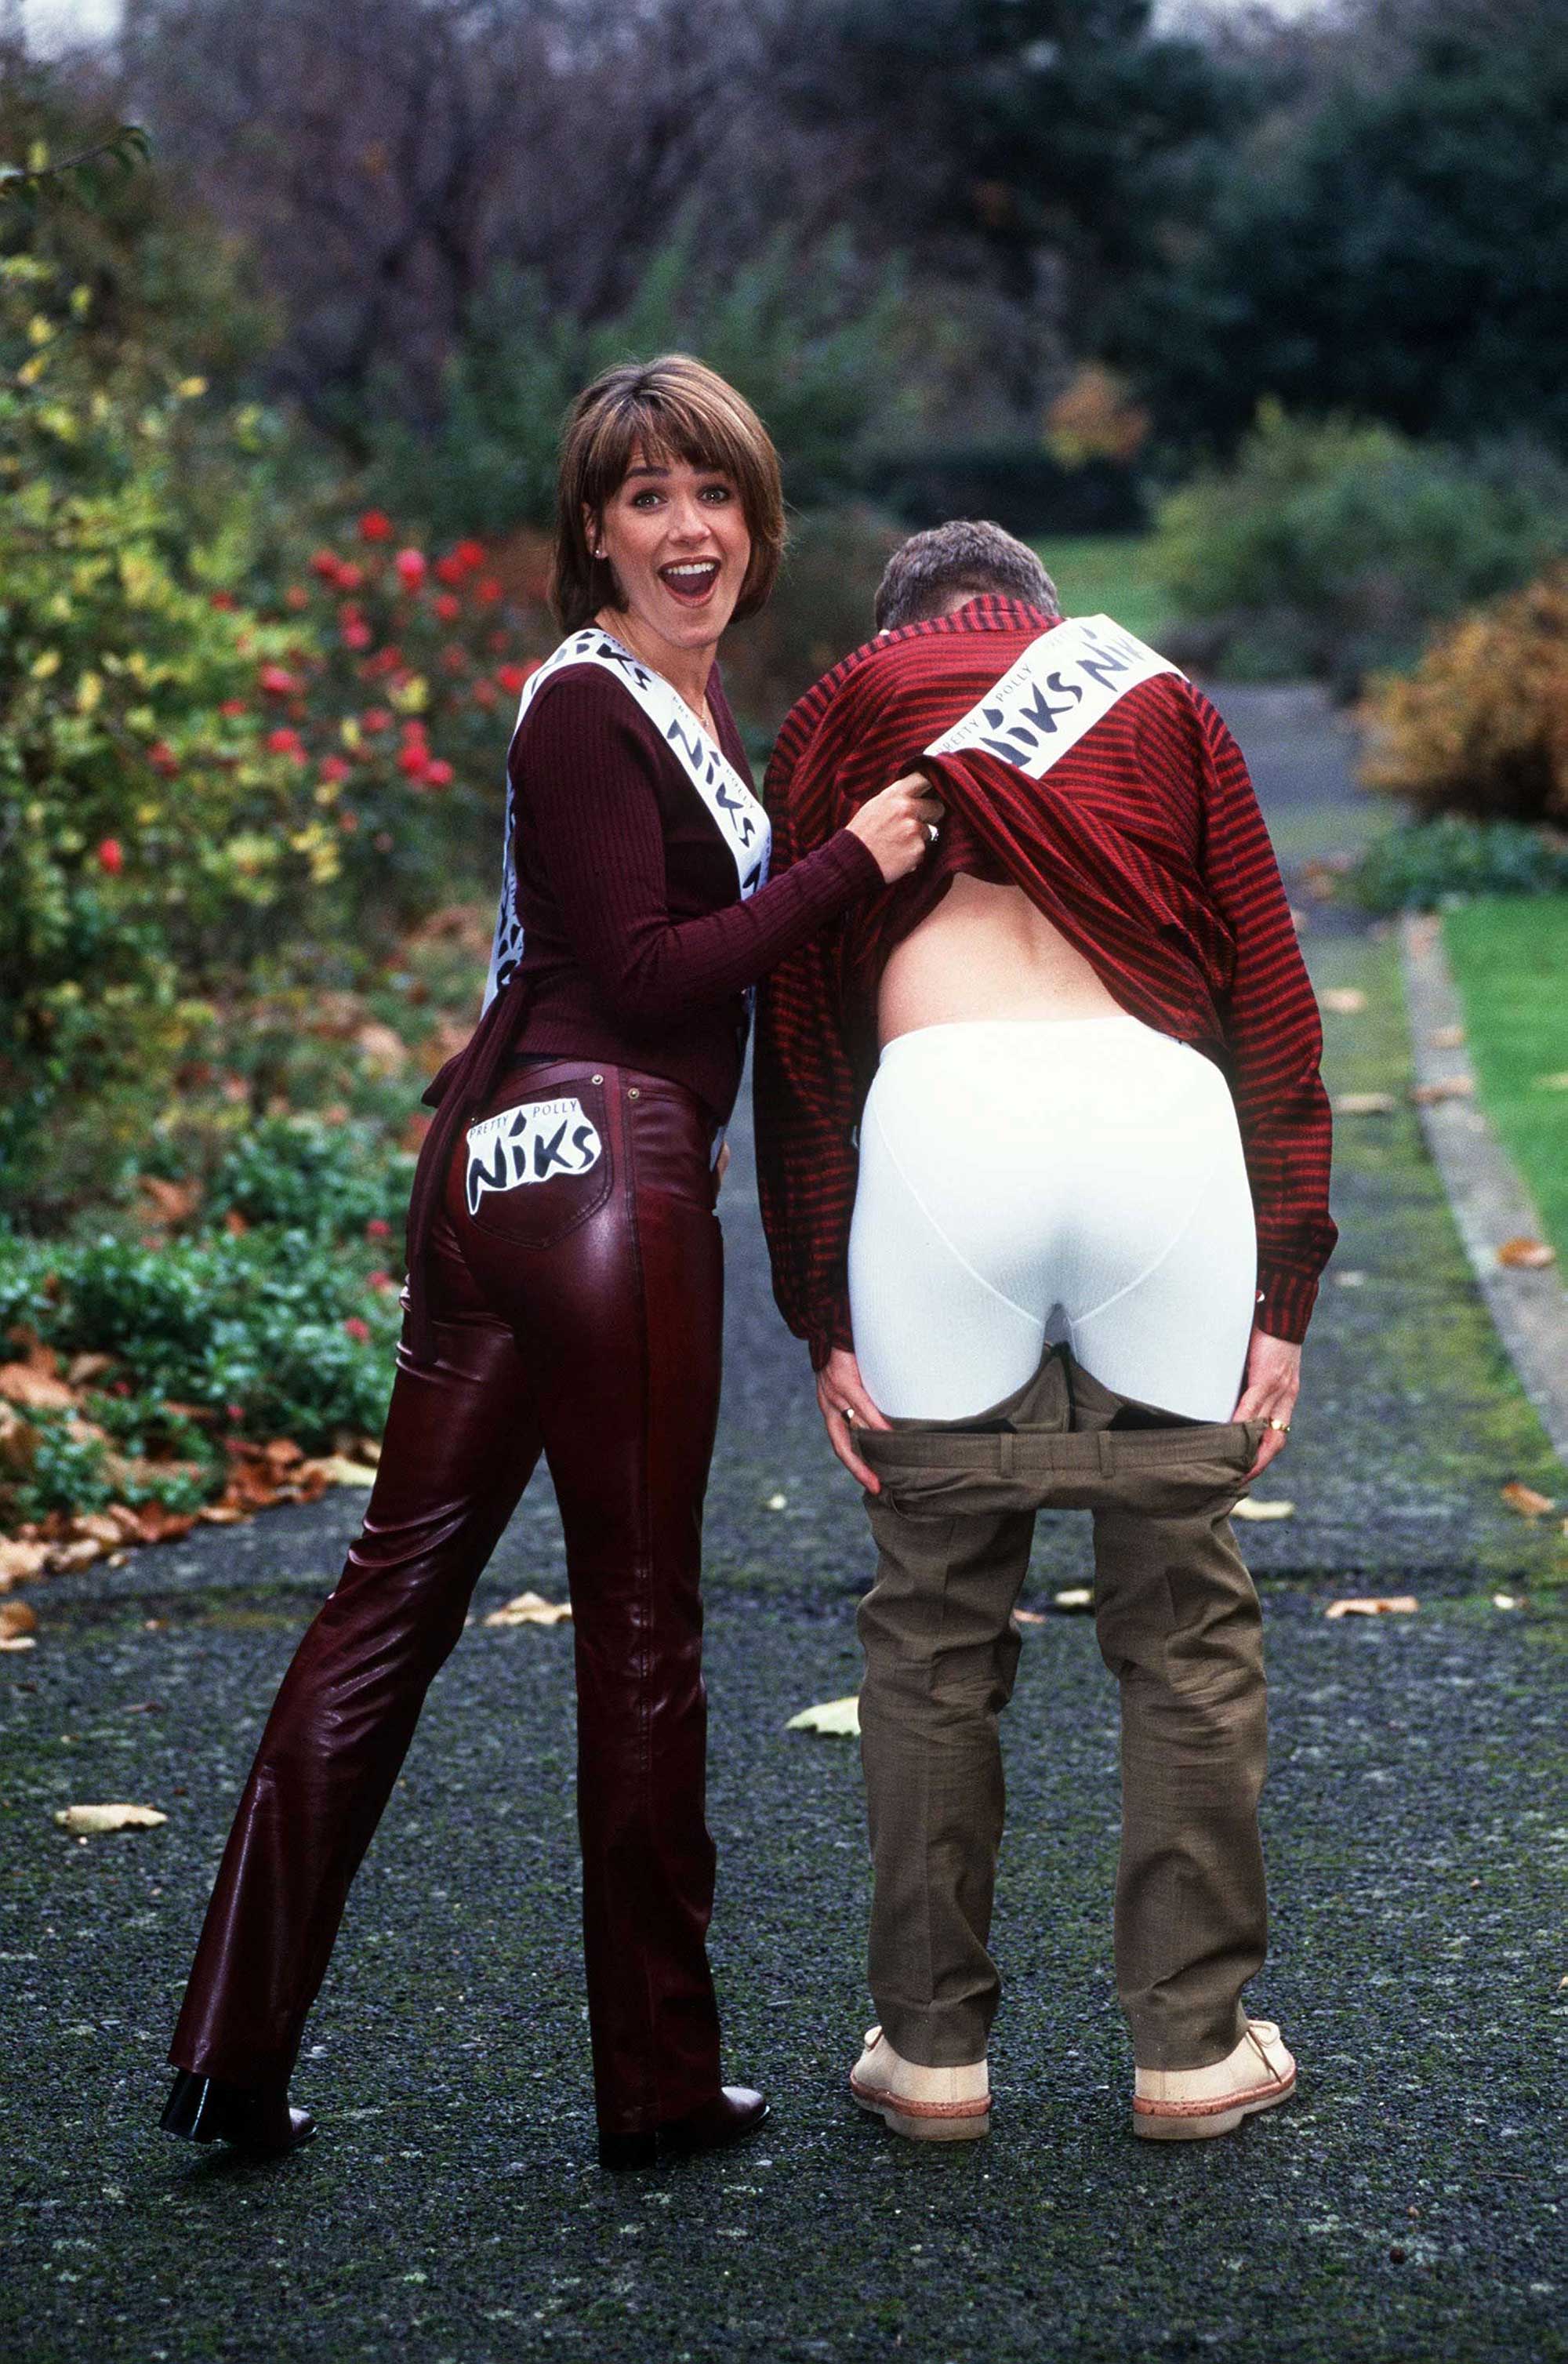 Carol Smillie Rear of the year 1998